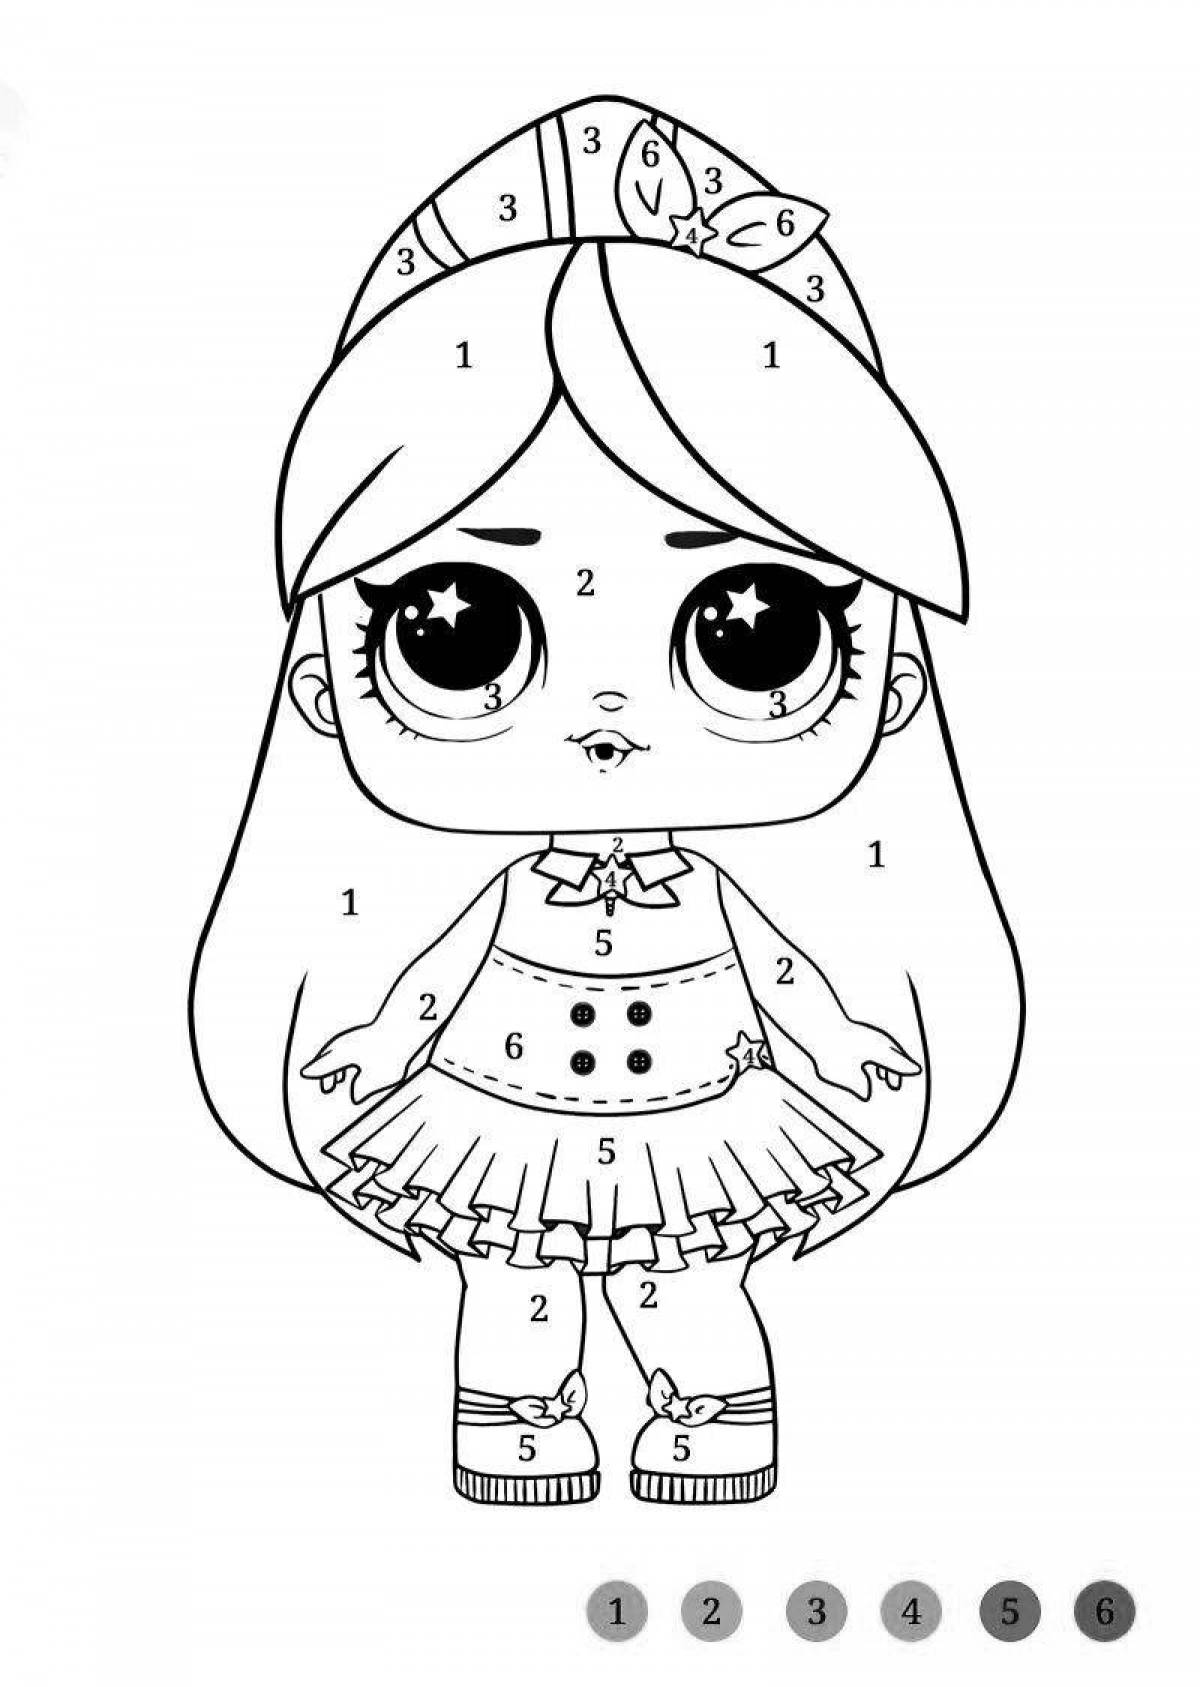 Adorable lol coloring page drawing